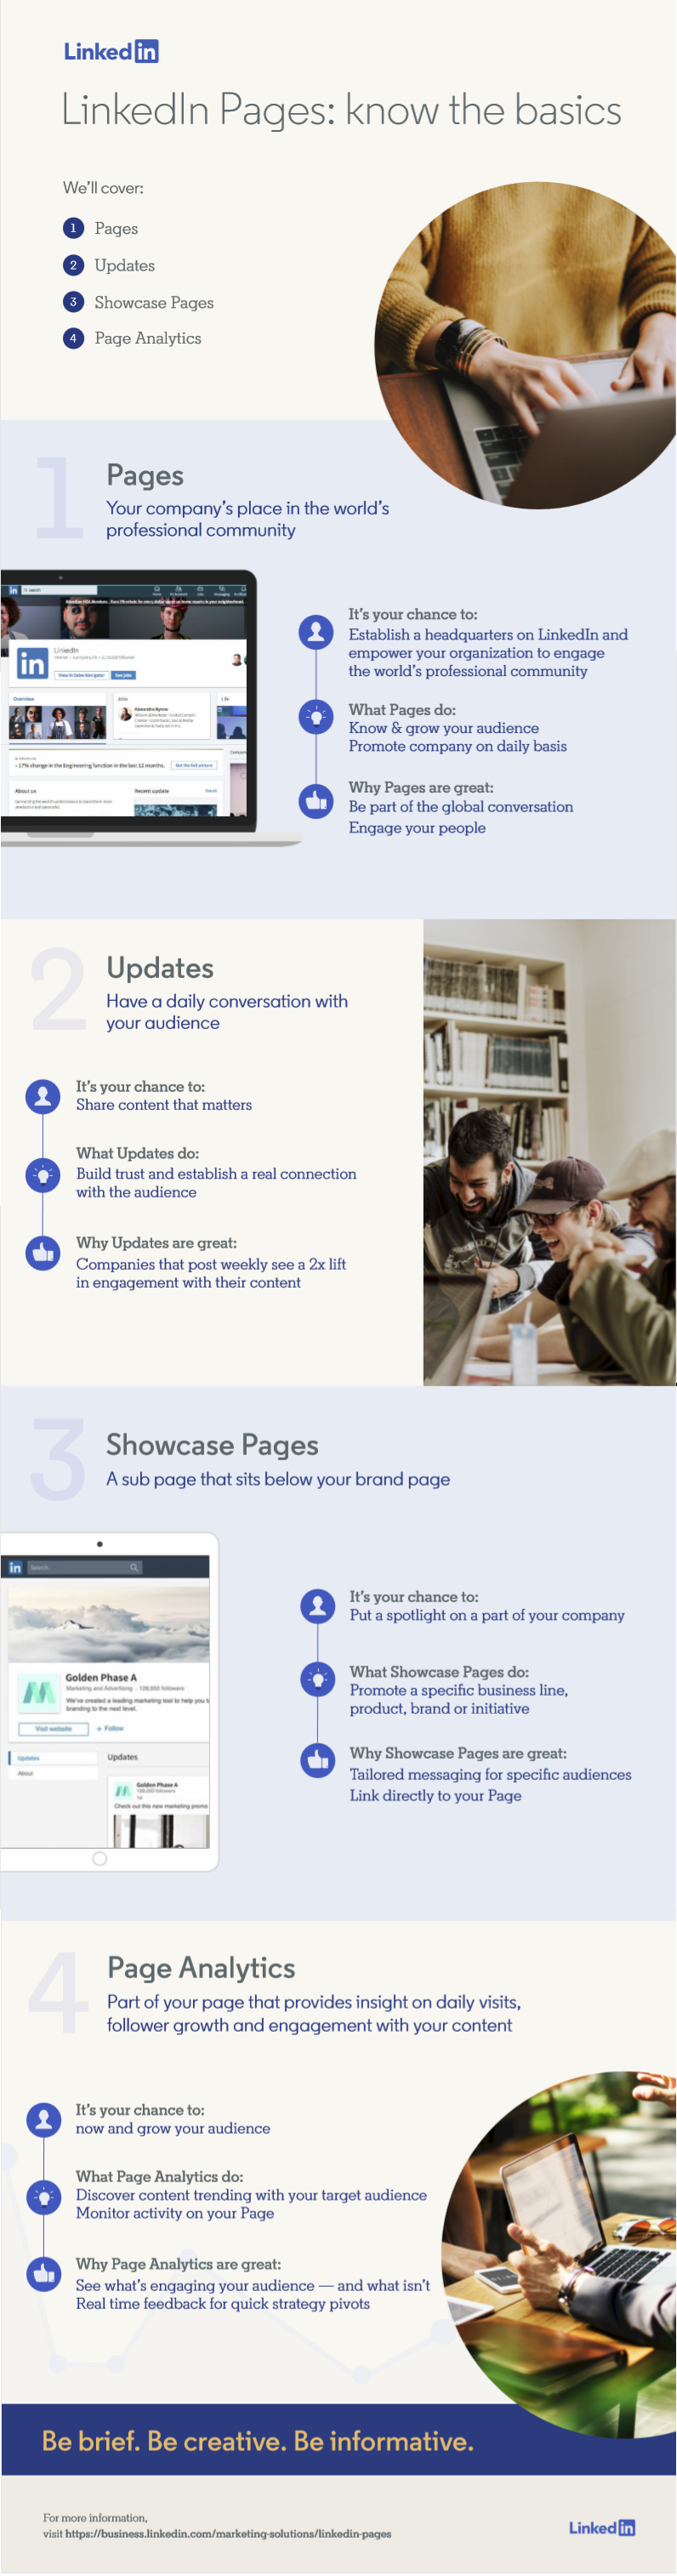 , LinkedIn Pages: Know the Basics [Infographic], TornCRM